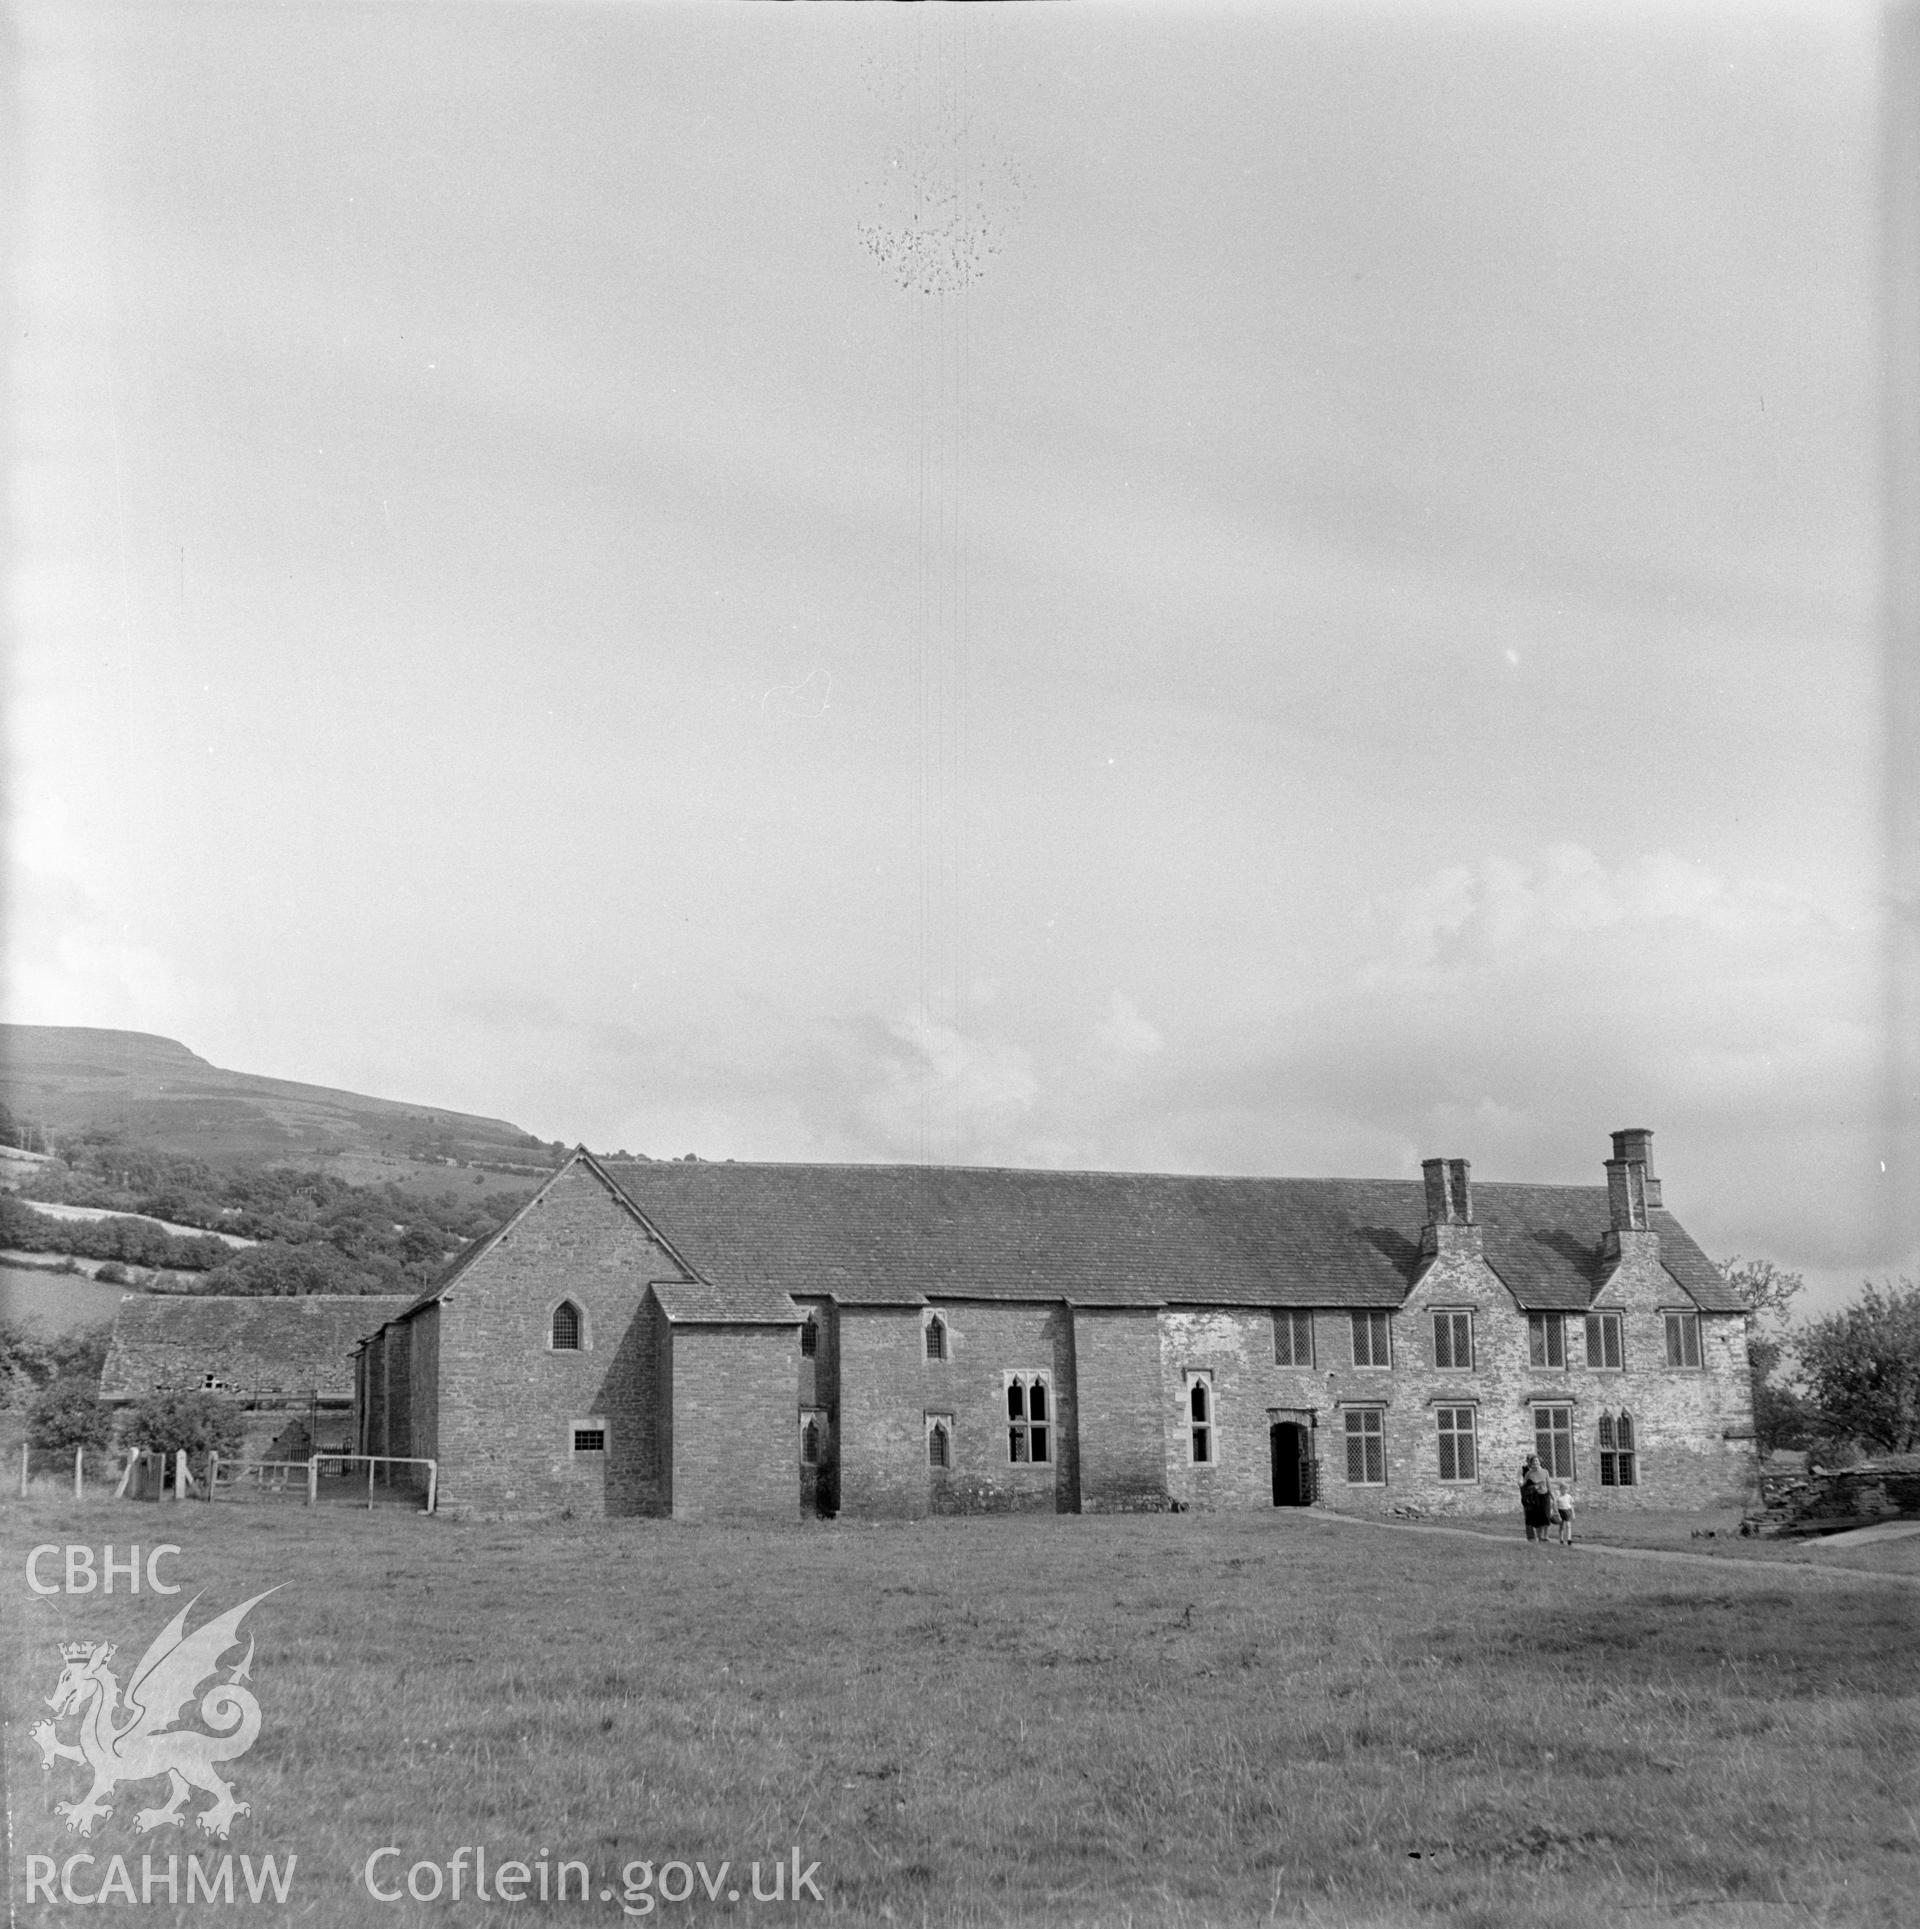 Digital copy of a black and white negative showing Tretower Court and barn.